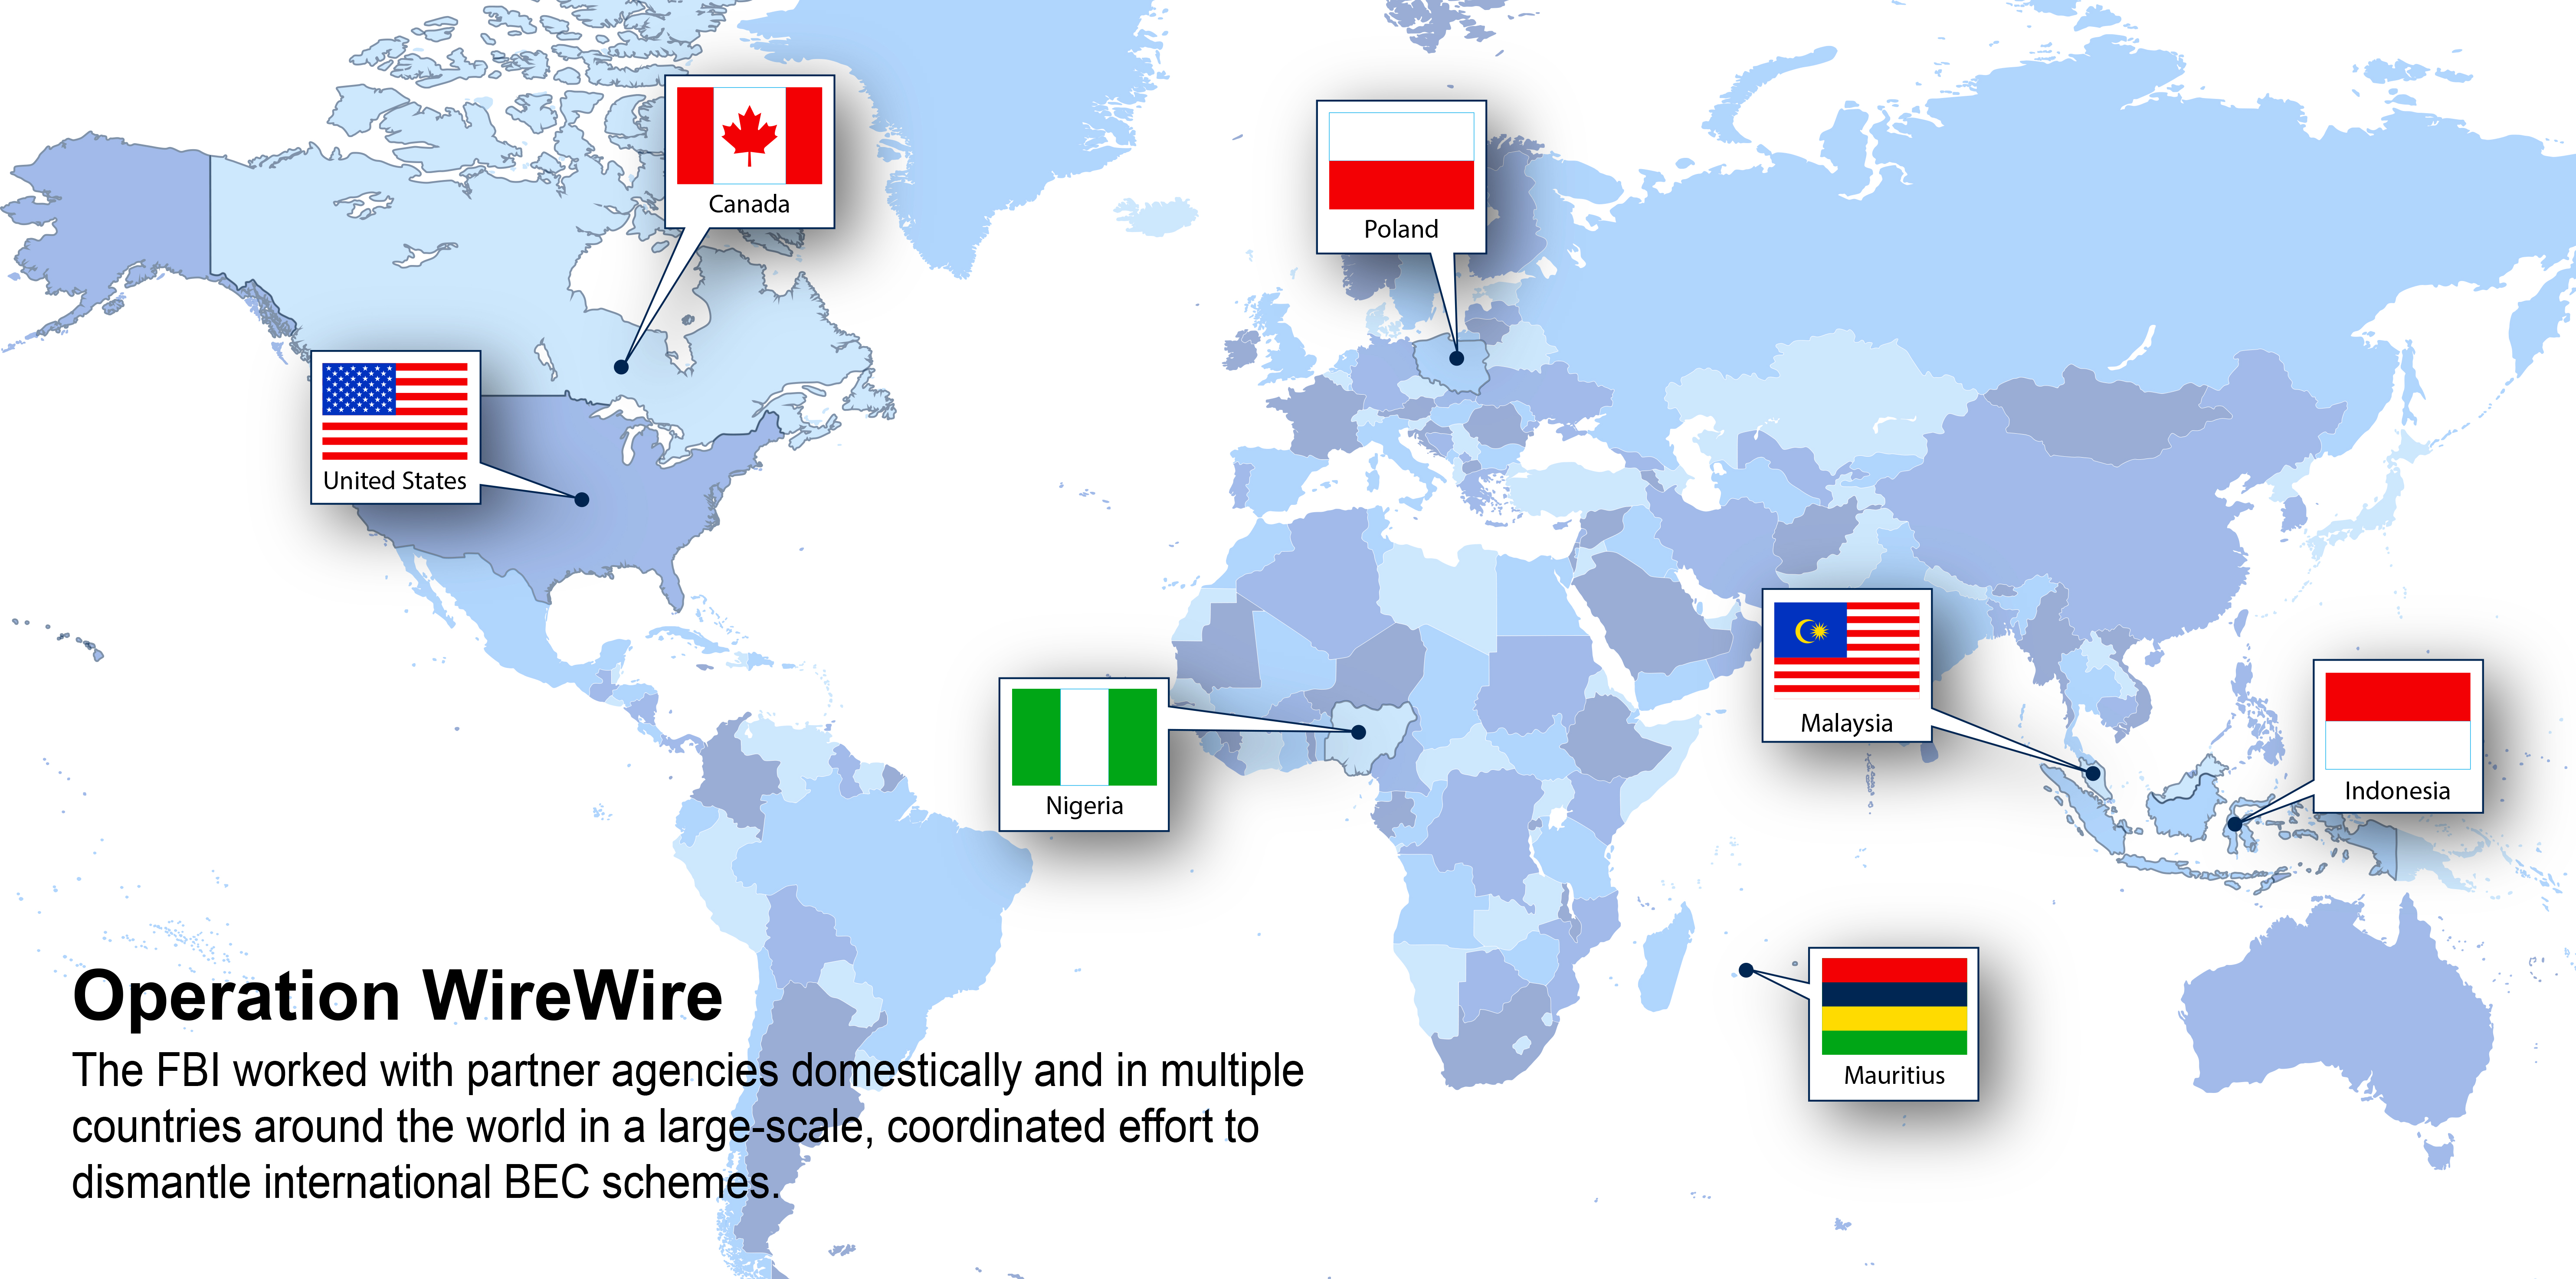 Map of the world depicting countries (with flags) who worked with the FBI on Operation WireWire, a large-scale, coordinated effort to dismantle international business e-mail compromise schemes.